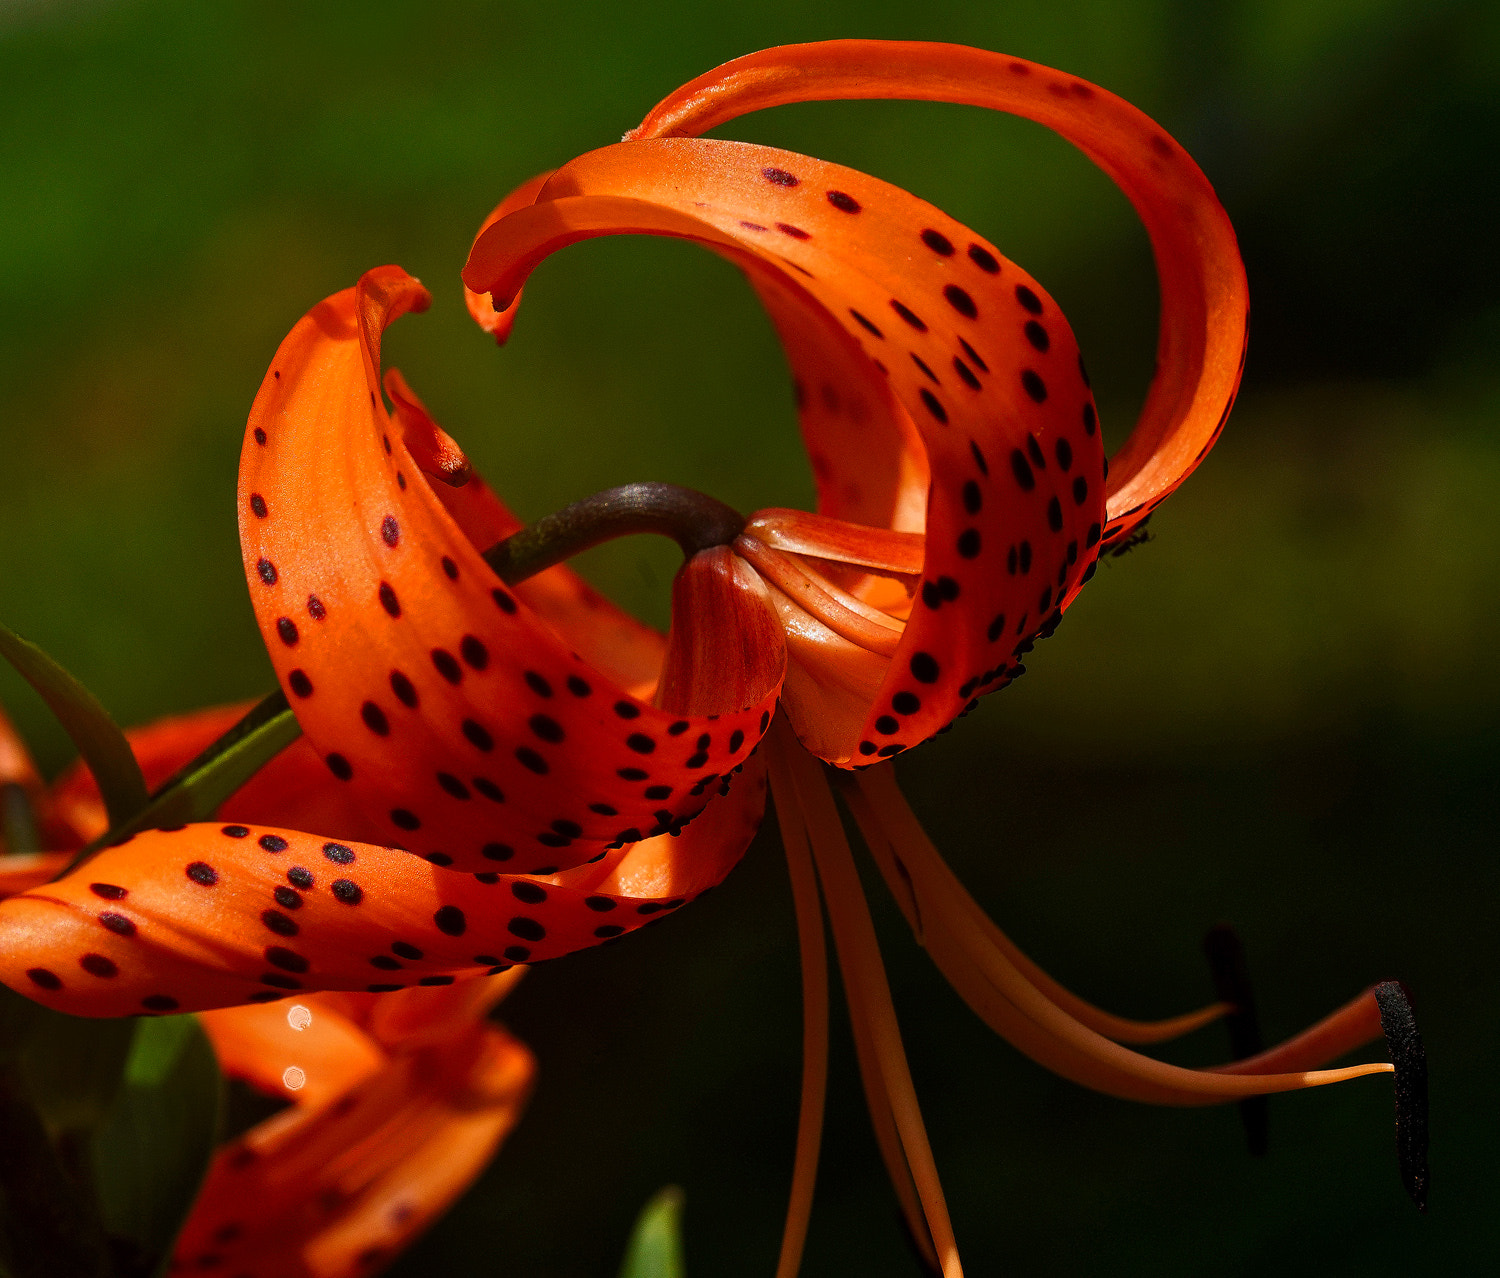 100mm F2.8 SSM sample photo. Tiger lily 2 photography